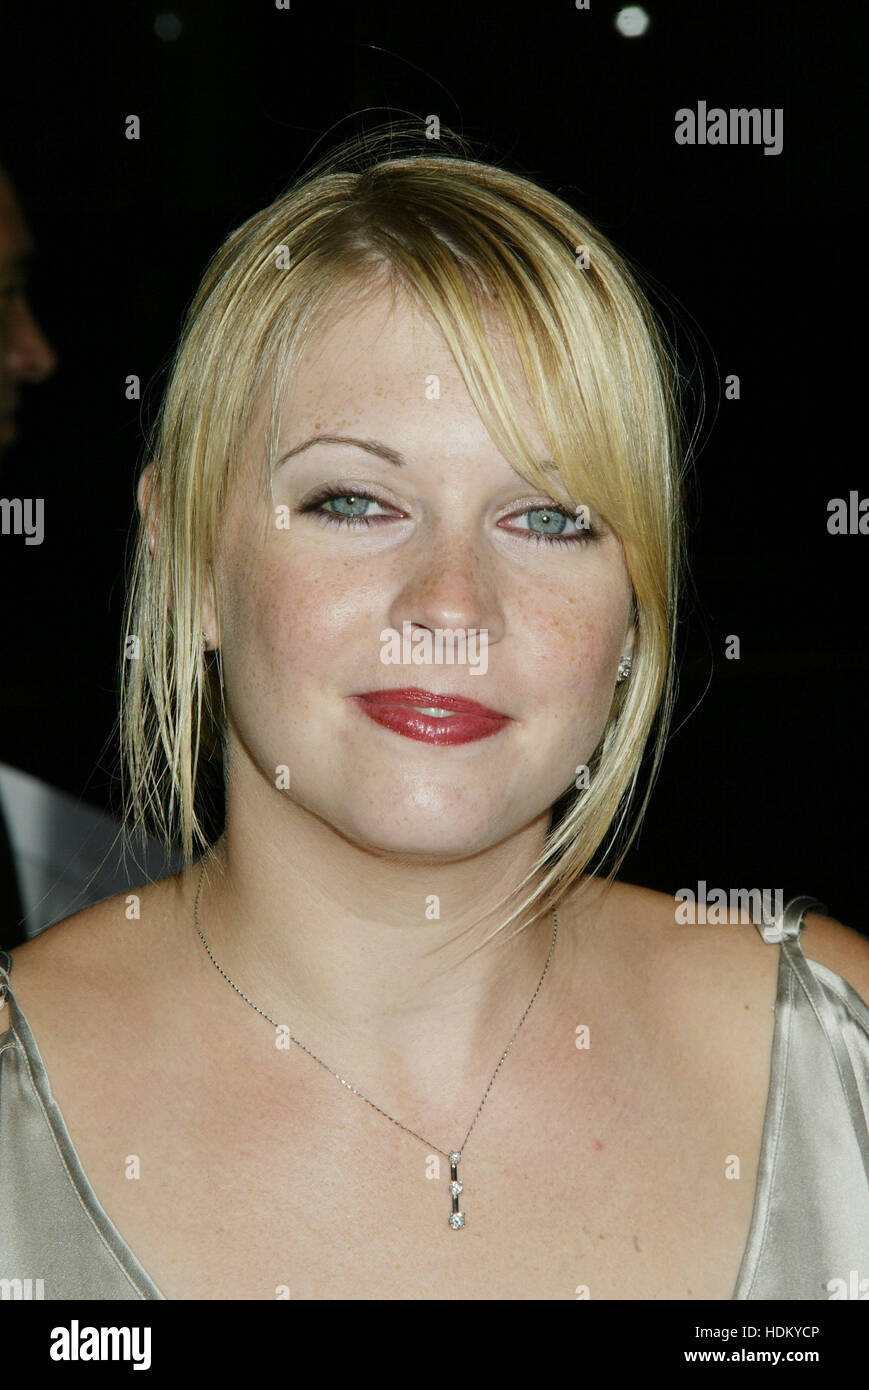 Actress Melissa Joan Hart at the premiere of 'Wimbledon' in Beverly Hills on September 13, 2004 in Los Angeles, California. Photo credit: Francis Specker Stock Photo